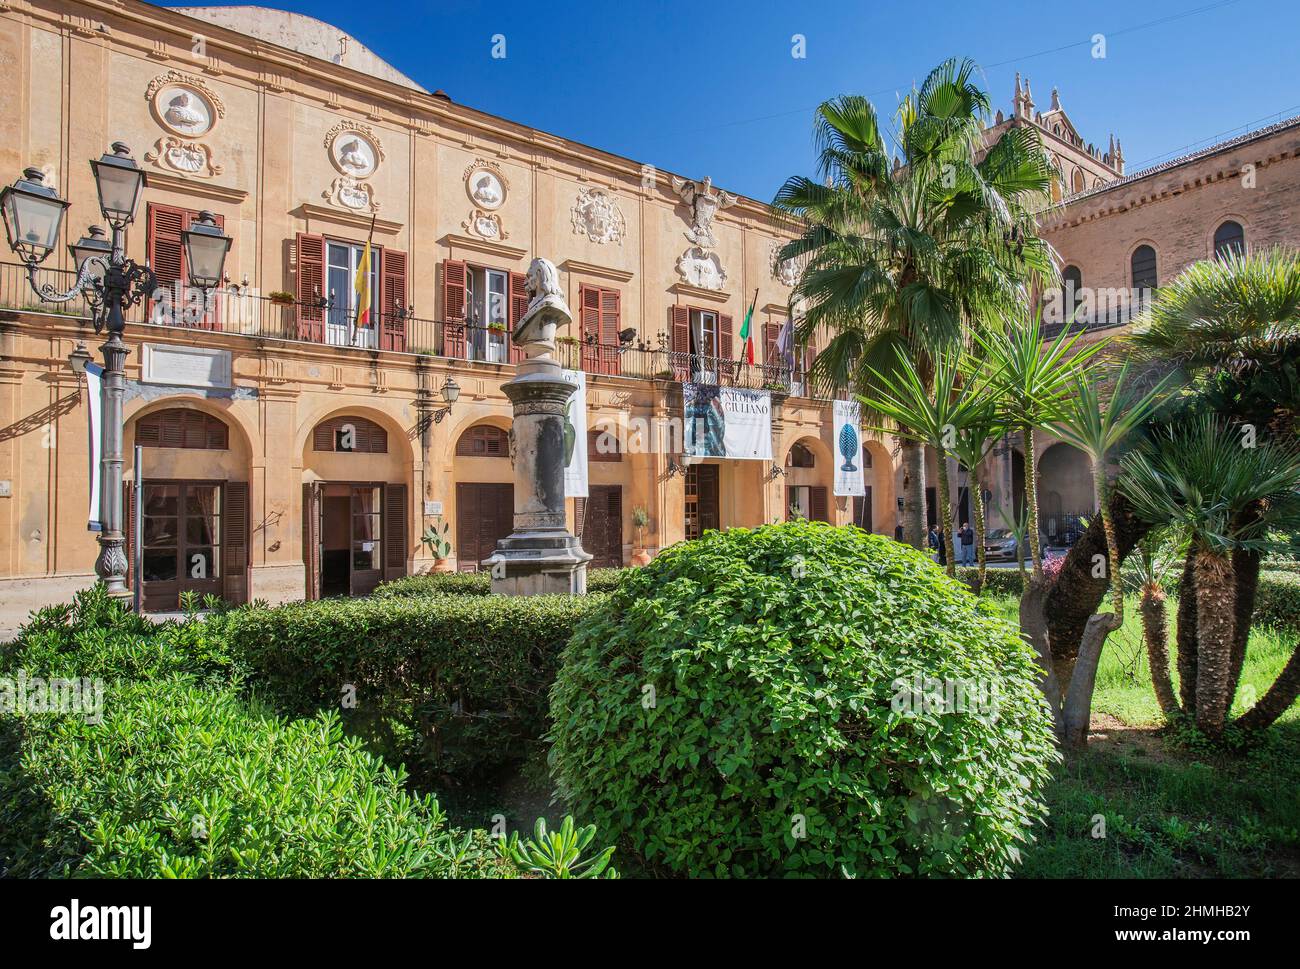 Piazza Vittorio Emanuele with the town hall in the center, Monreale, Sicily, Italy Stock Photo